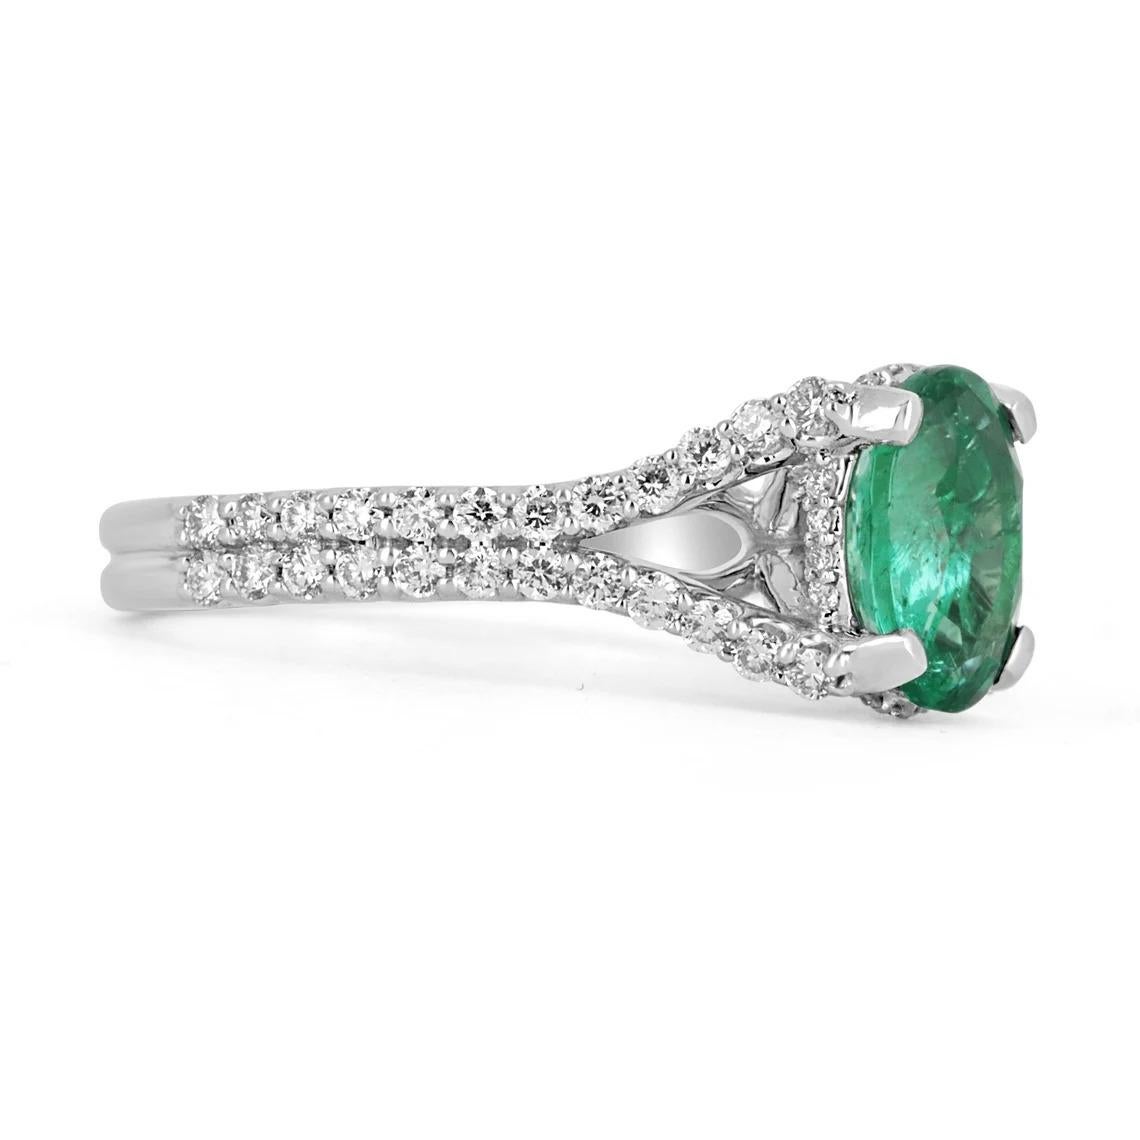 This is an exquisite, Colombian emerald and diamond halo split shank ring. The gorgeous setting lets sit an excellent quality Colombian emerald with beautiful color and very good eye clarity. The emerald is not perfect and small imperfections do